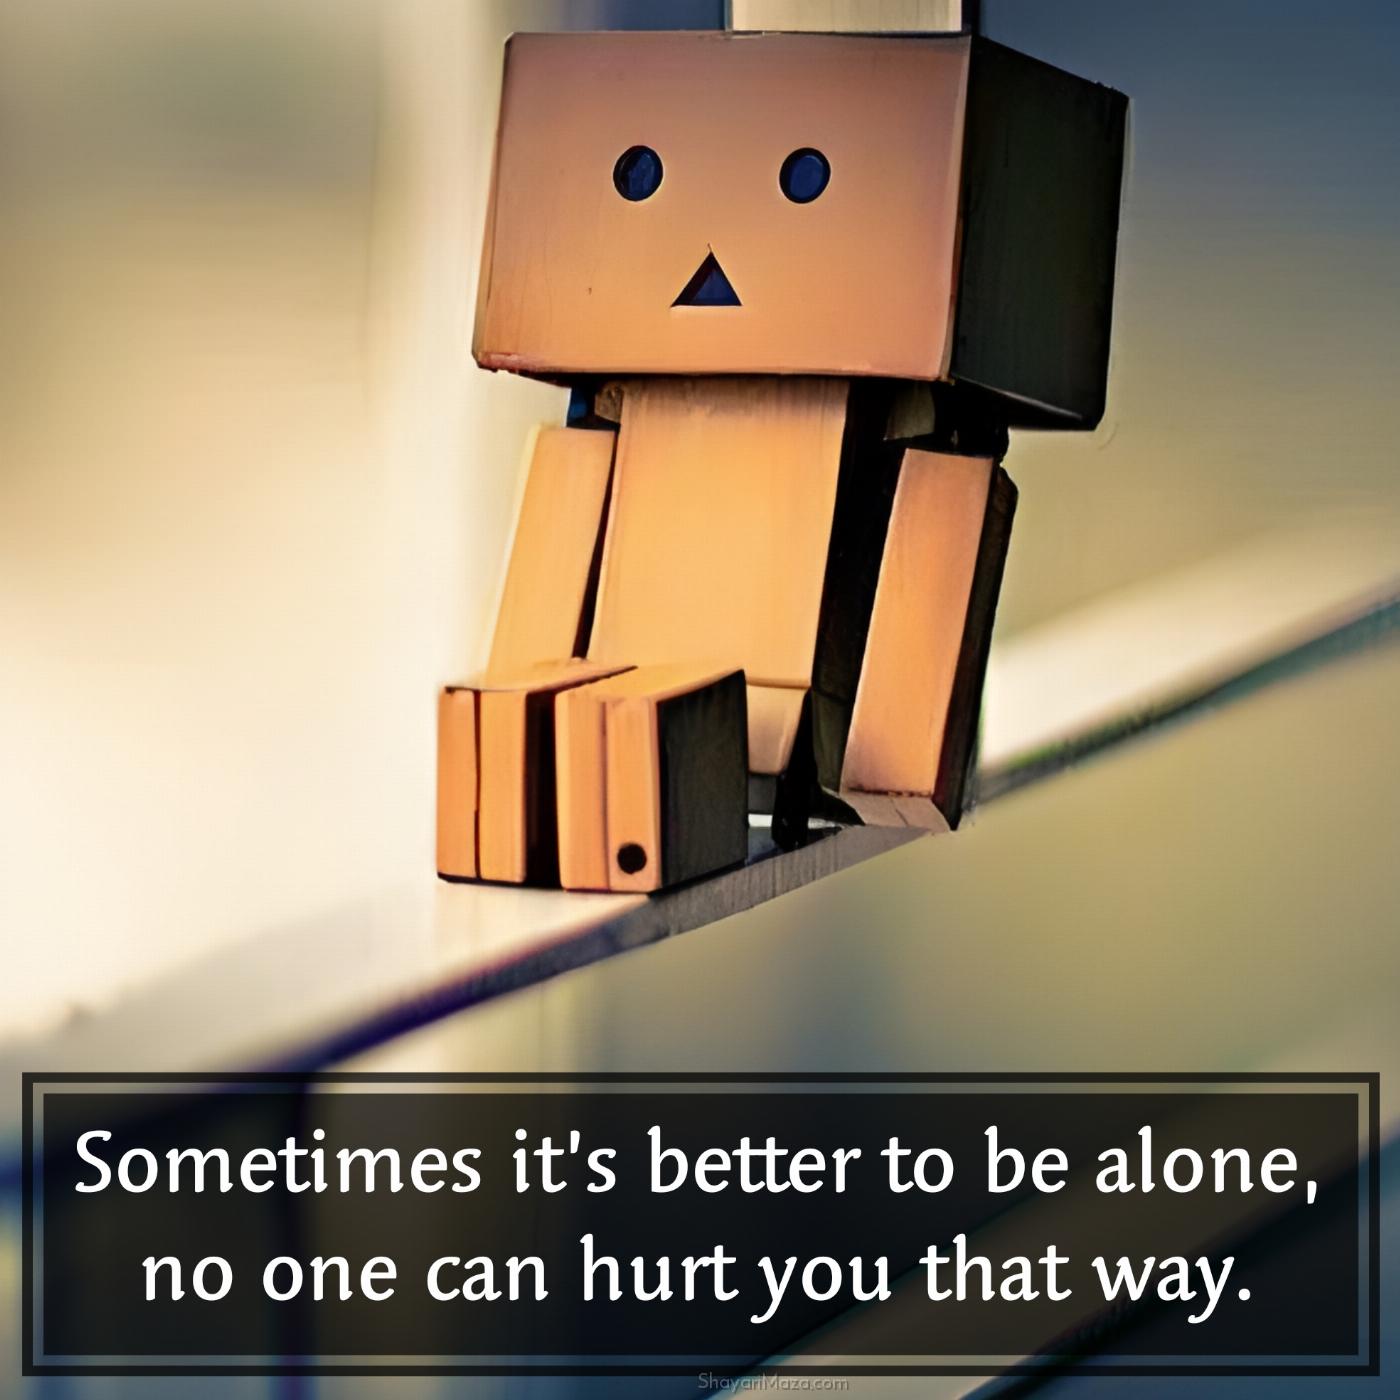 Sometimes life is too hard to be alone and sometimes